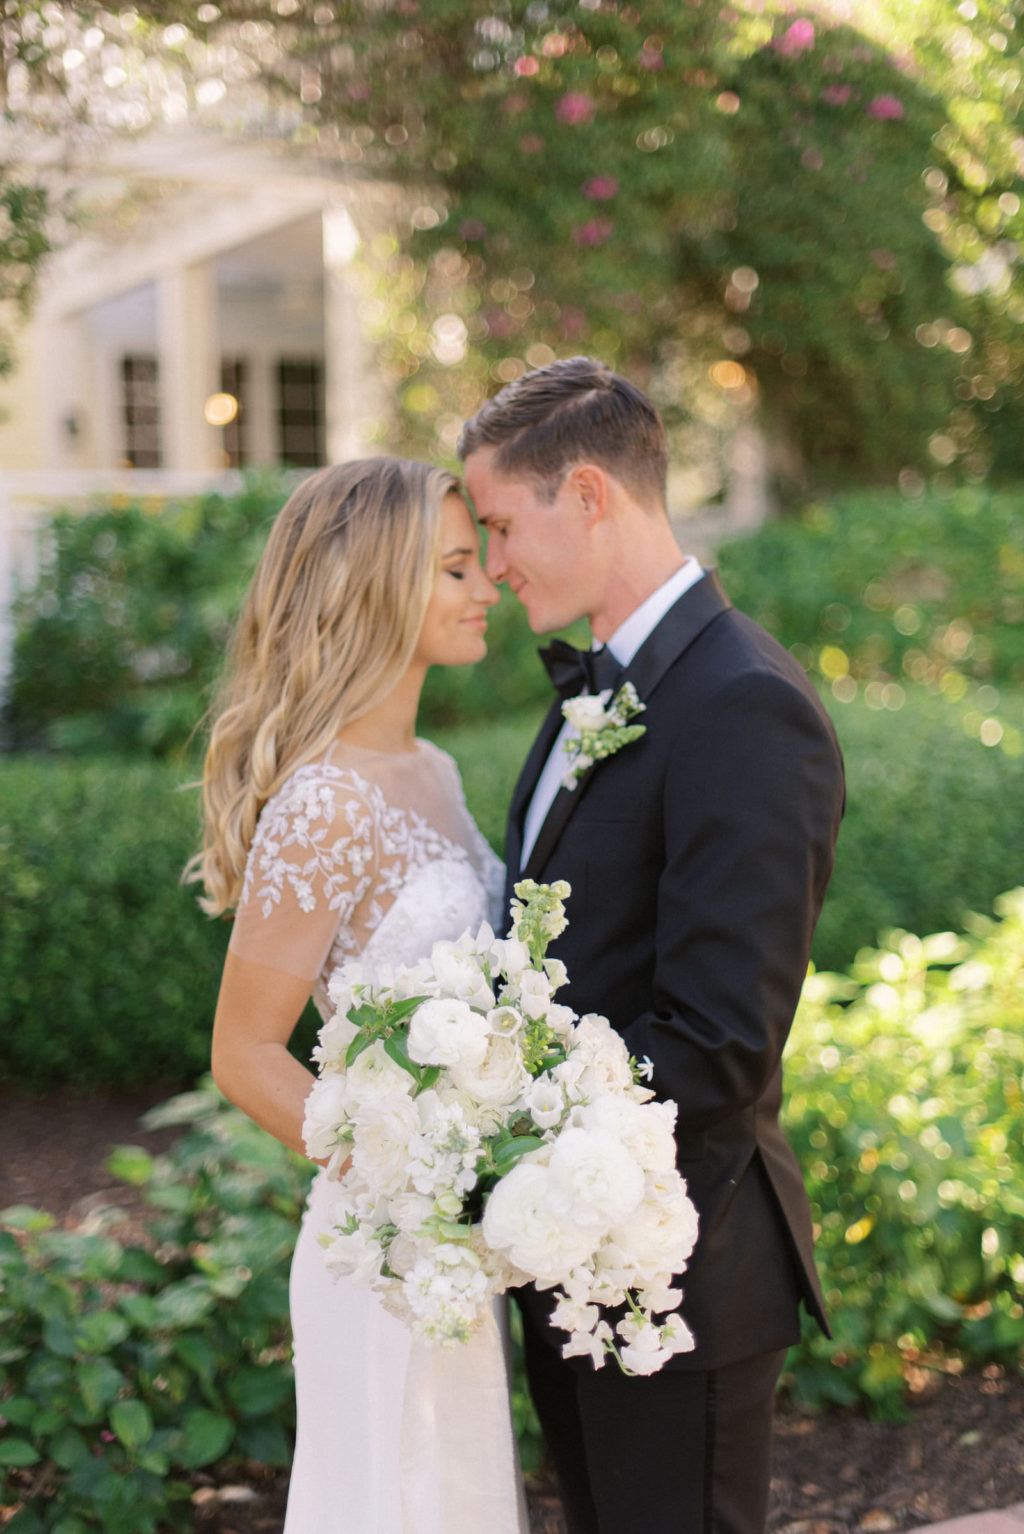 Florida Groom in Black Tuxedo and Bride Wearing Suzanne Neville Mayflower Illusion and Delicate Floral Lace Embellishment Cap Sleeve and Crepe Fitted Wedding Dress Holding Classic Lush White Floral Bouquet